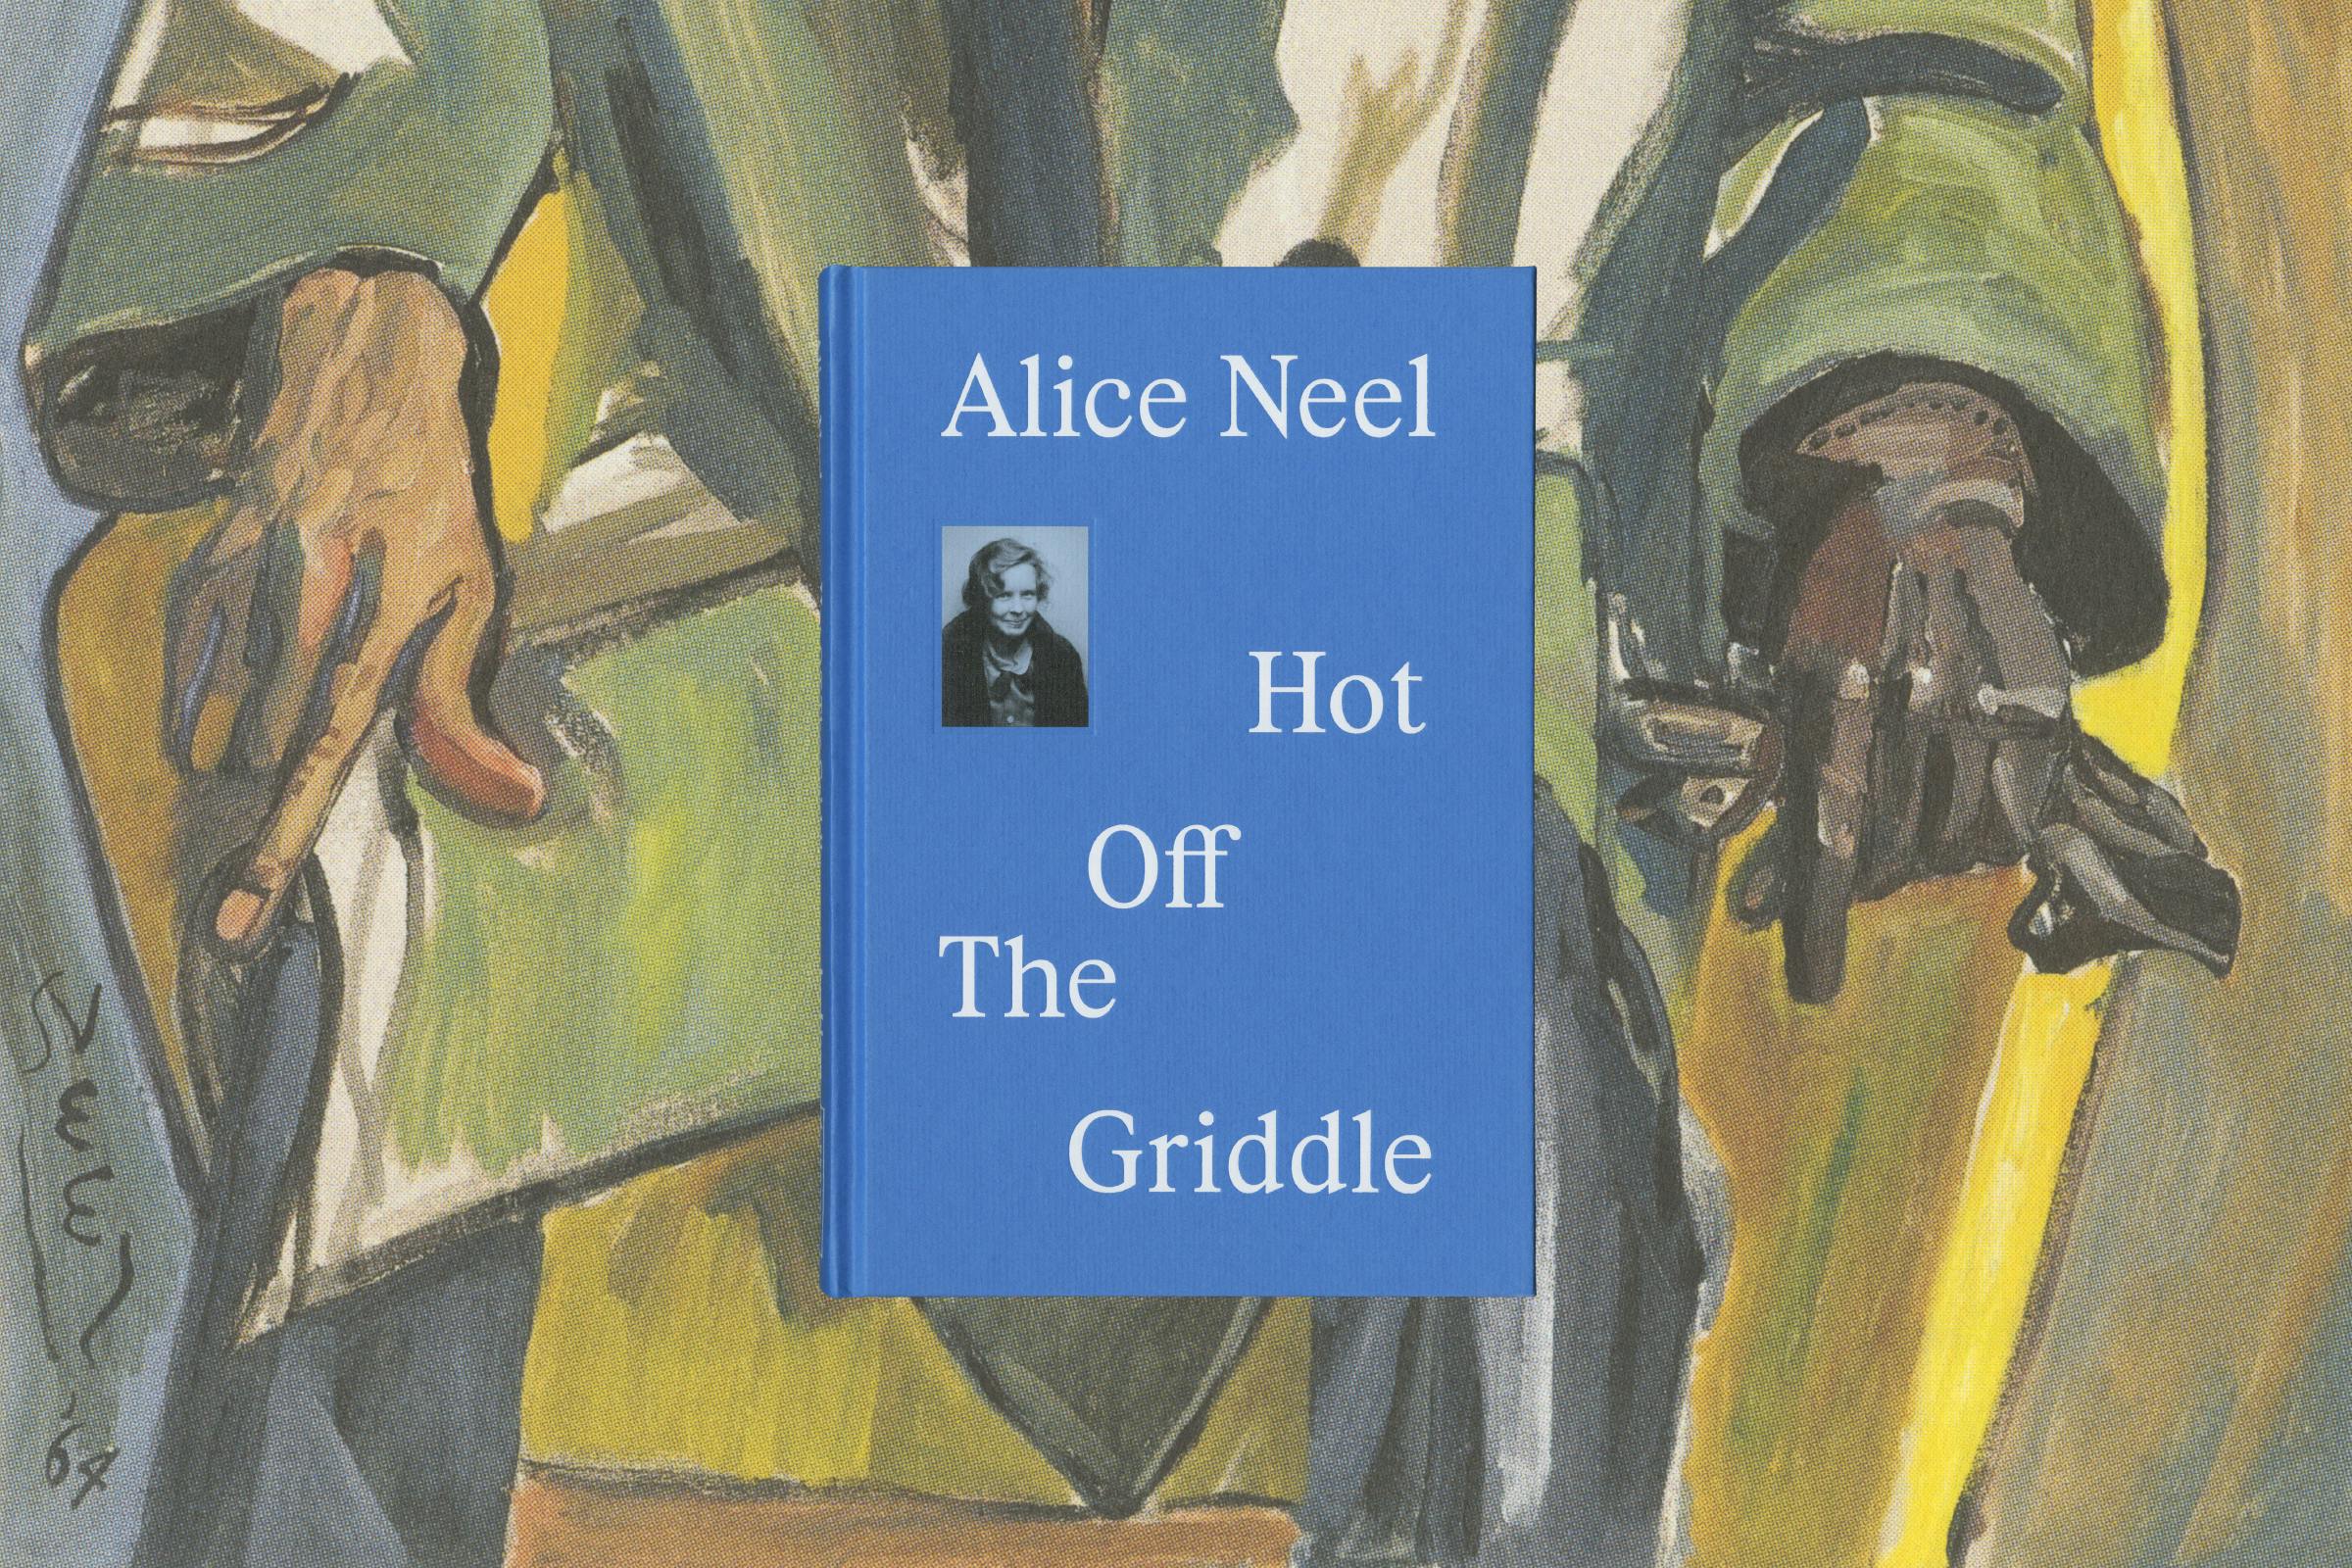 Alice Neel, Hot Off The Griddle, Barbican, Prestel, Design by Wolfe Hall